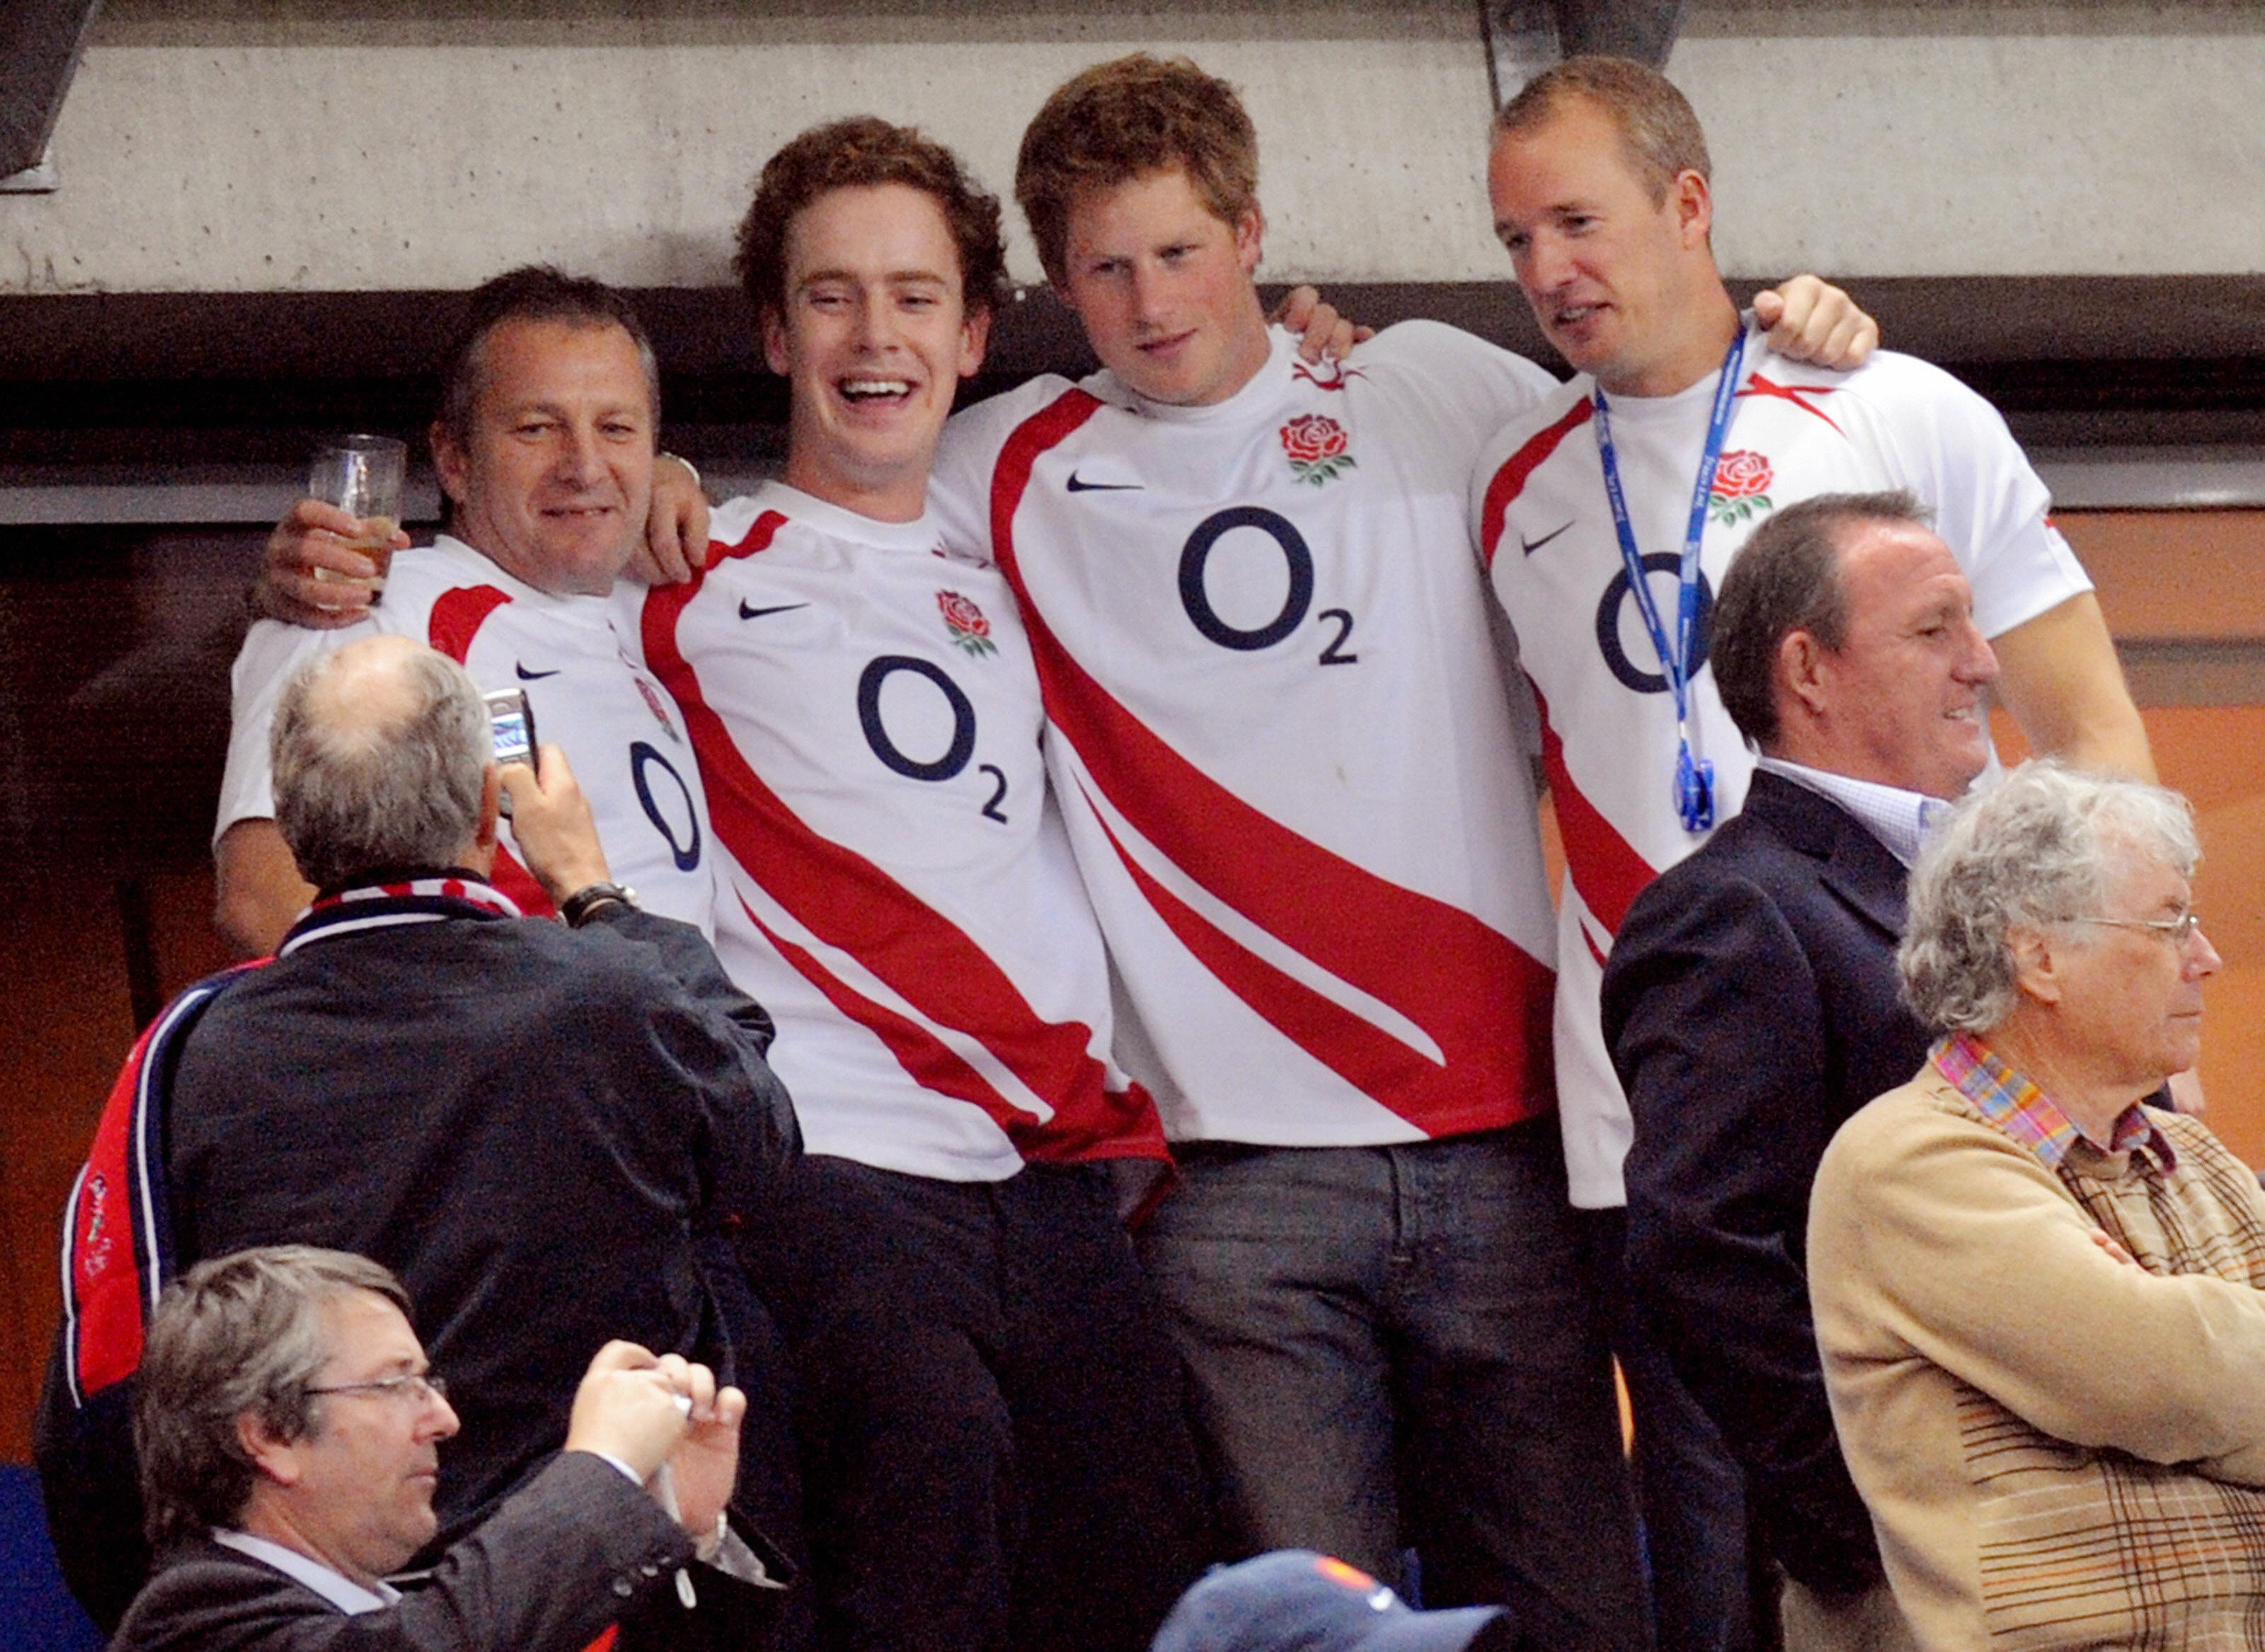 Prince Harry celebrating England's victory with friends at the end of the rugby union World Cup 2007 semi final match England vs. France at the Stade de France on 13 October 2007 in Saint-Denis, Paris. | Source: Getty Images